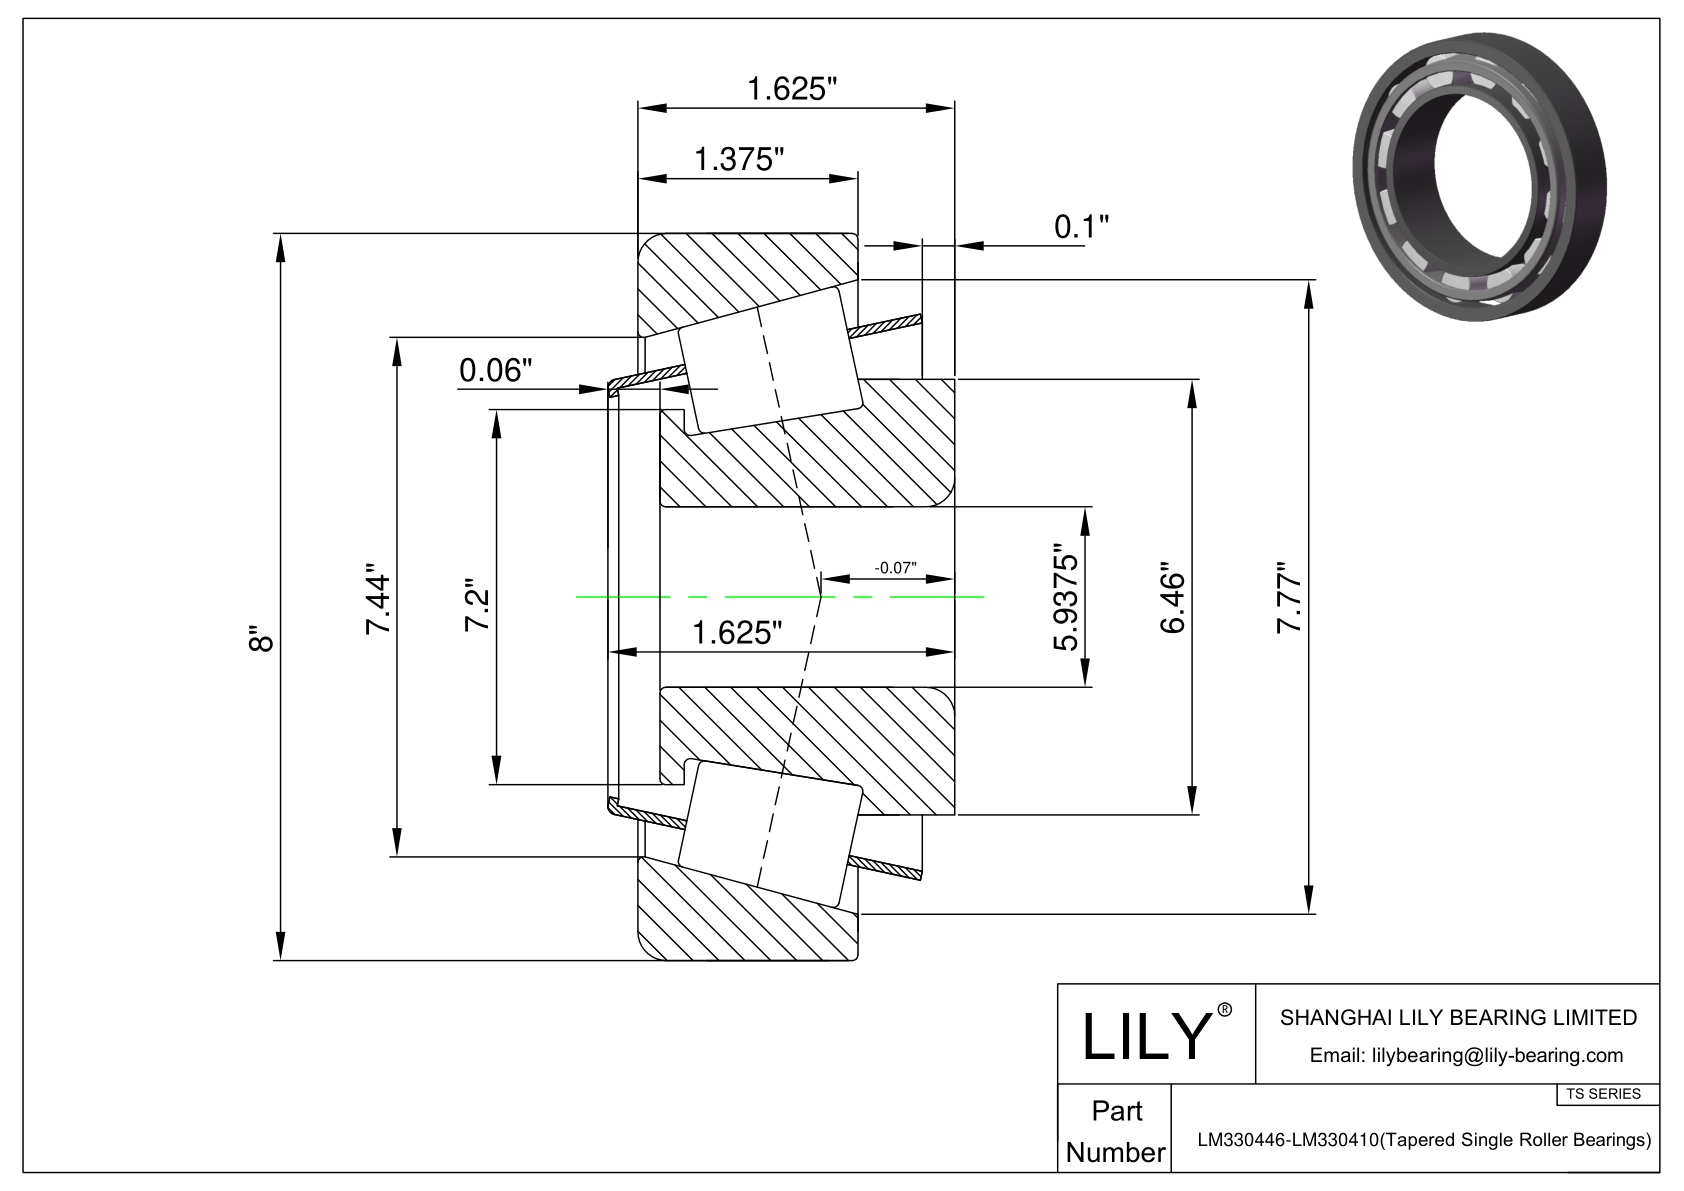 LM330446-LM330410 TS (Tapered Single Roller Bearings) (Imperial) cad drawing